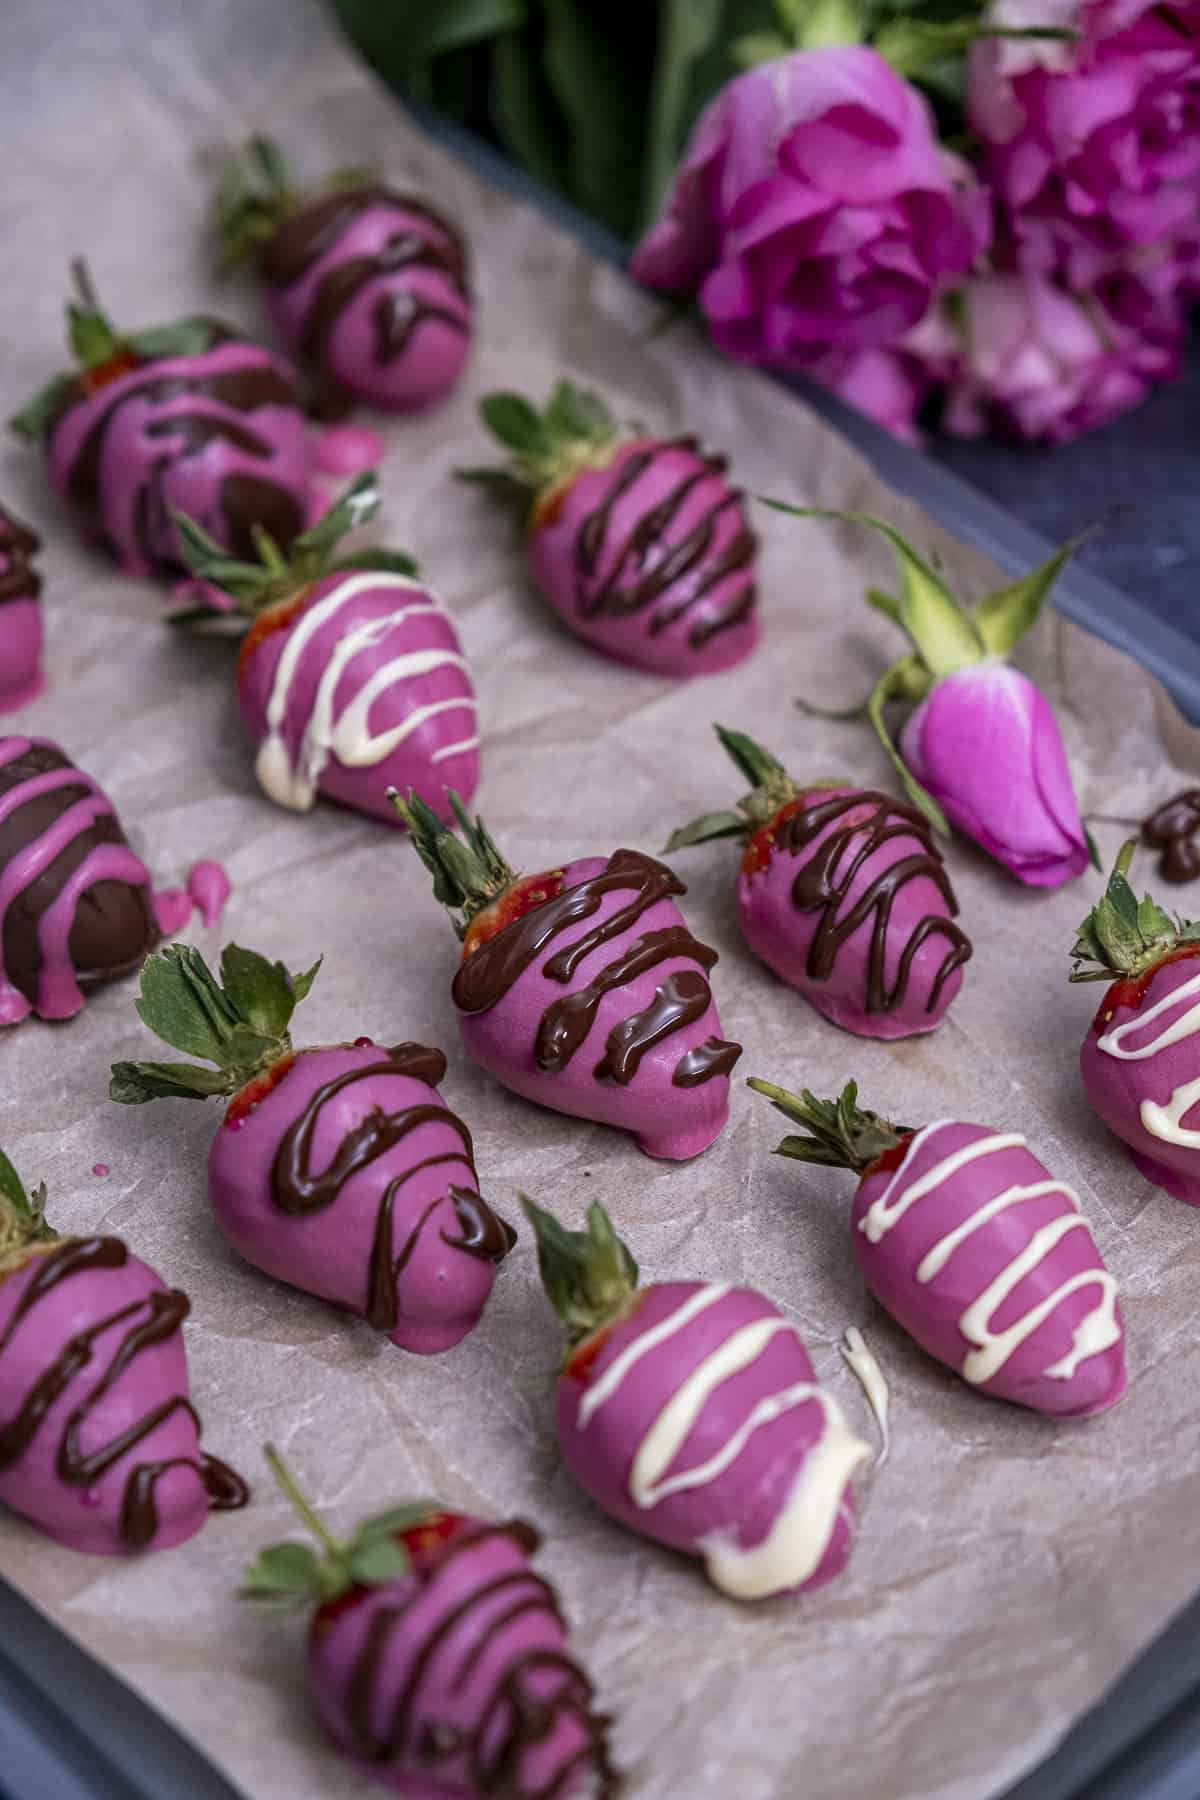 Pink strawberries decorated with white and dark chocolate drizzles and pink roses behind them.